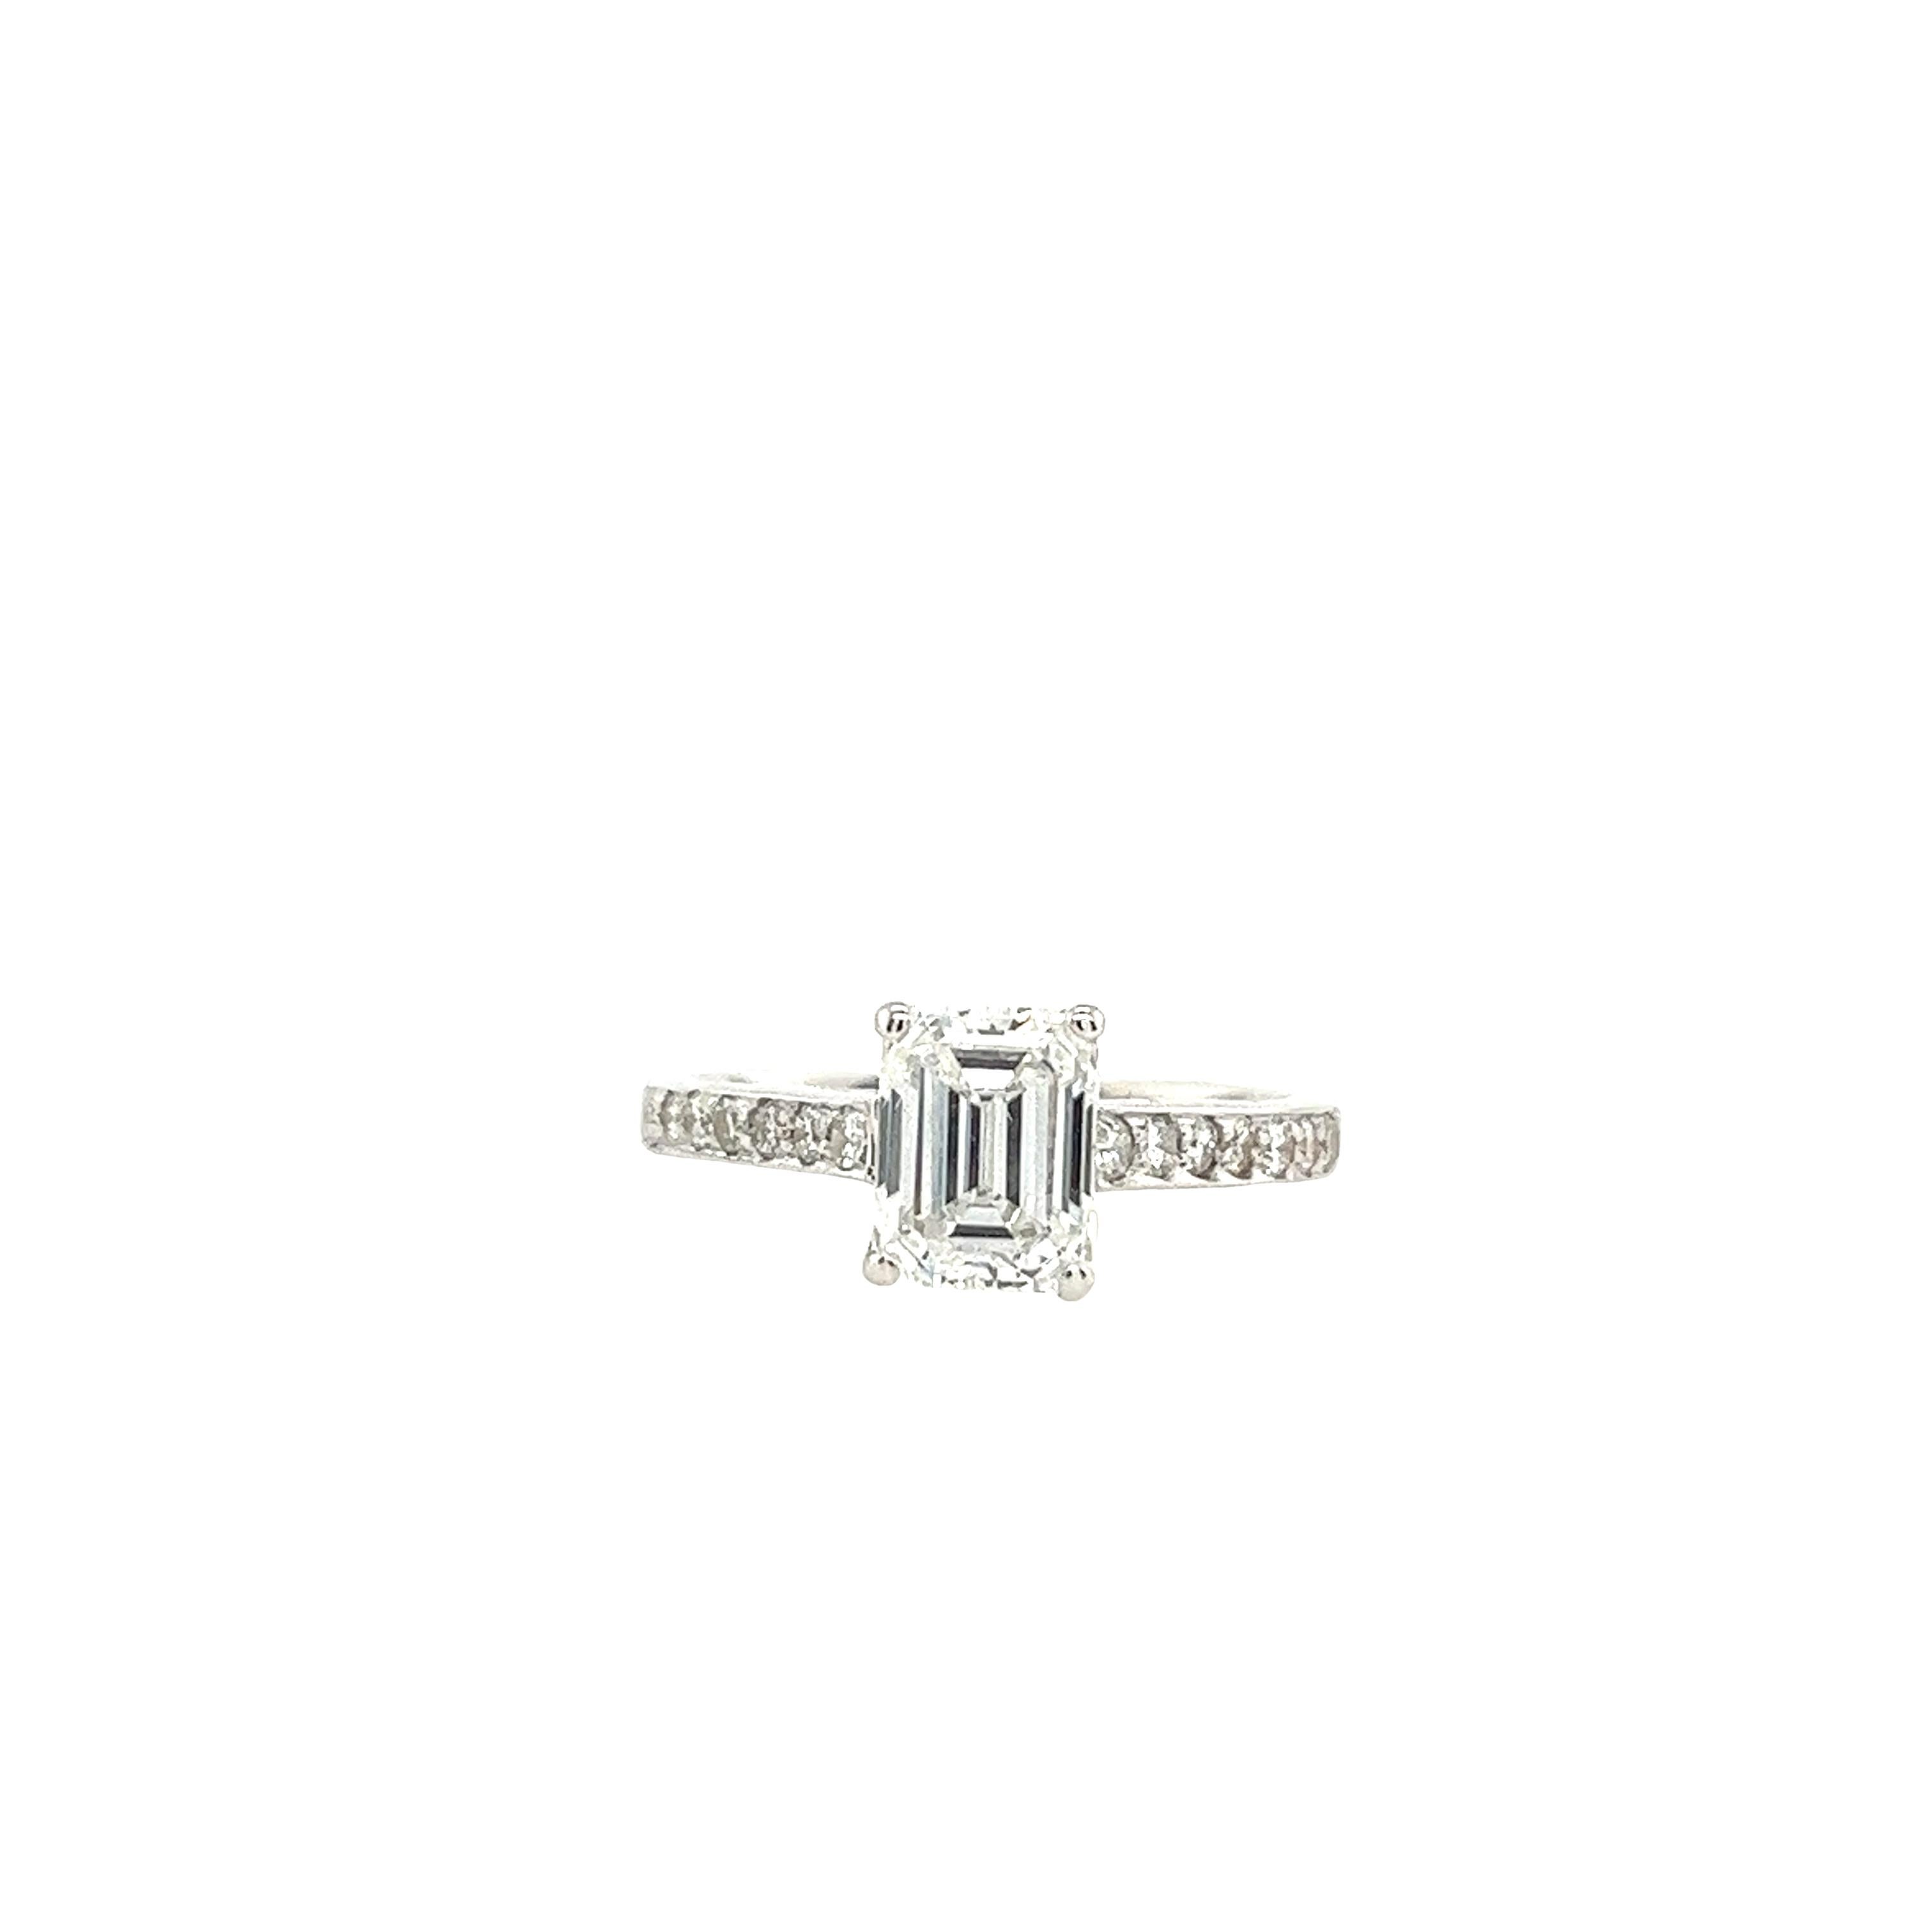 18ct White Gold Ring Set With 1.01ct E/SI1 Emerald Cut Diamond  In Excellent Condition For Sale In London, GB